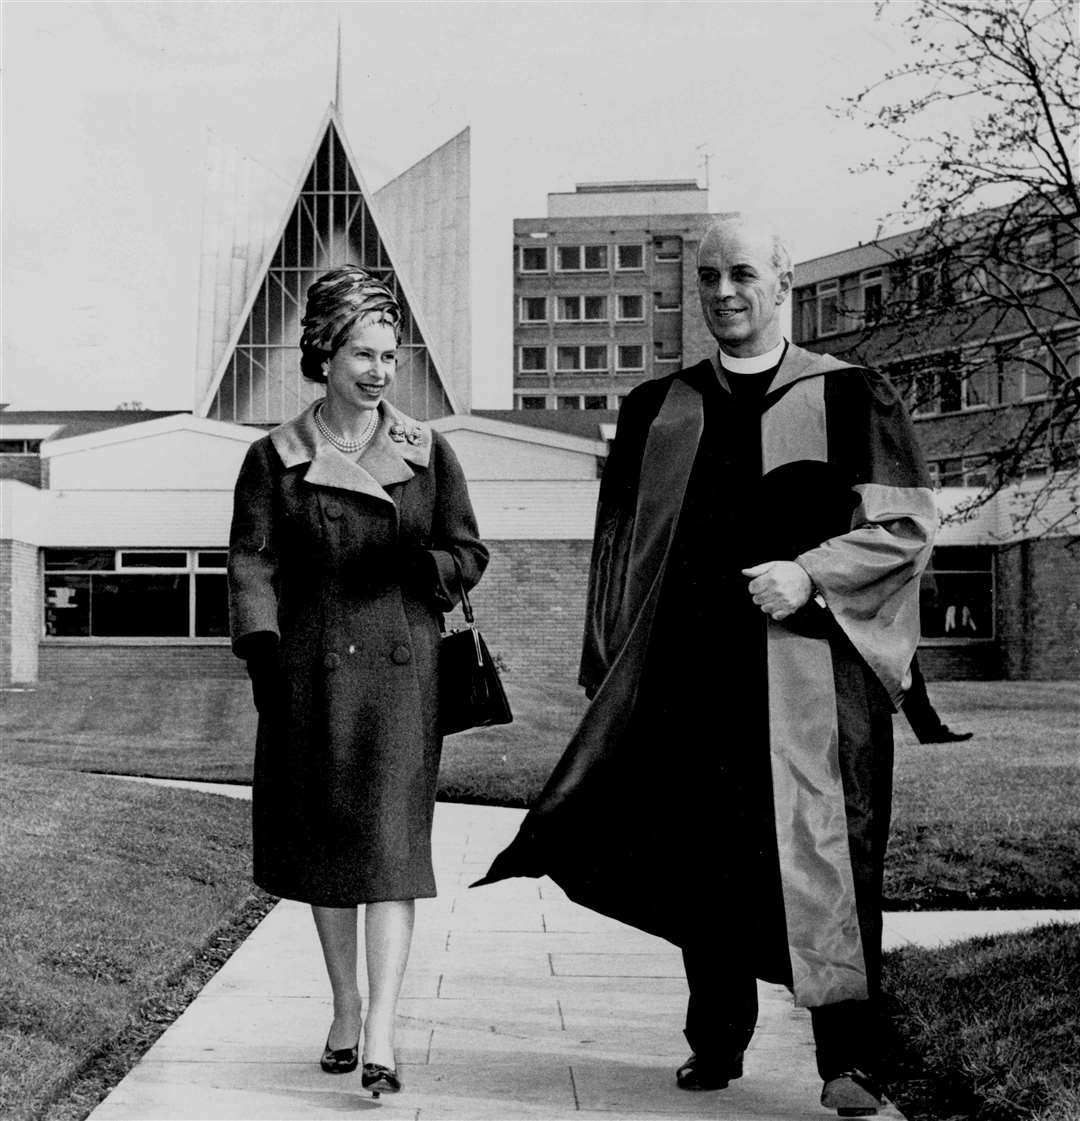 In April 1965 the Queen, in Canterbury for the Royal Maundy service, toured the new Christ Church College with the principal, Dr Frederic Mason